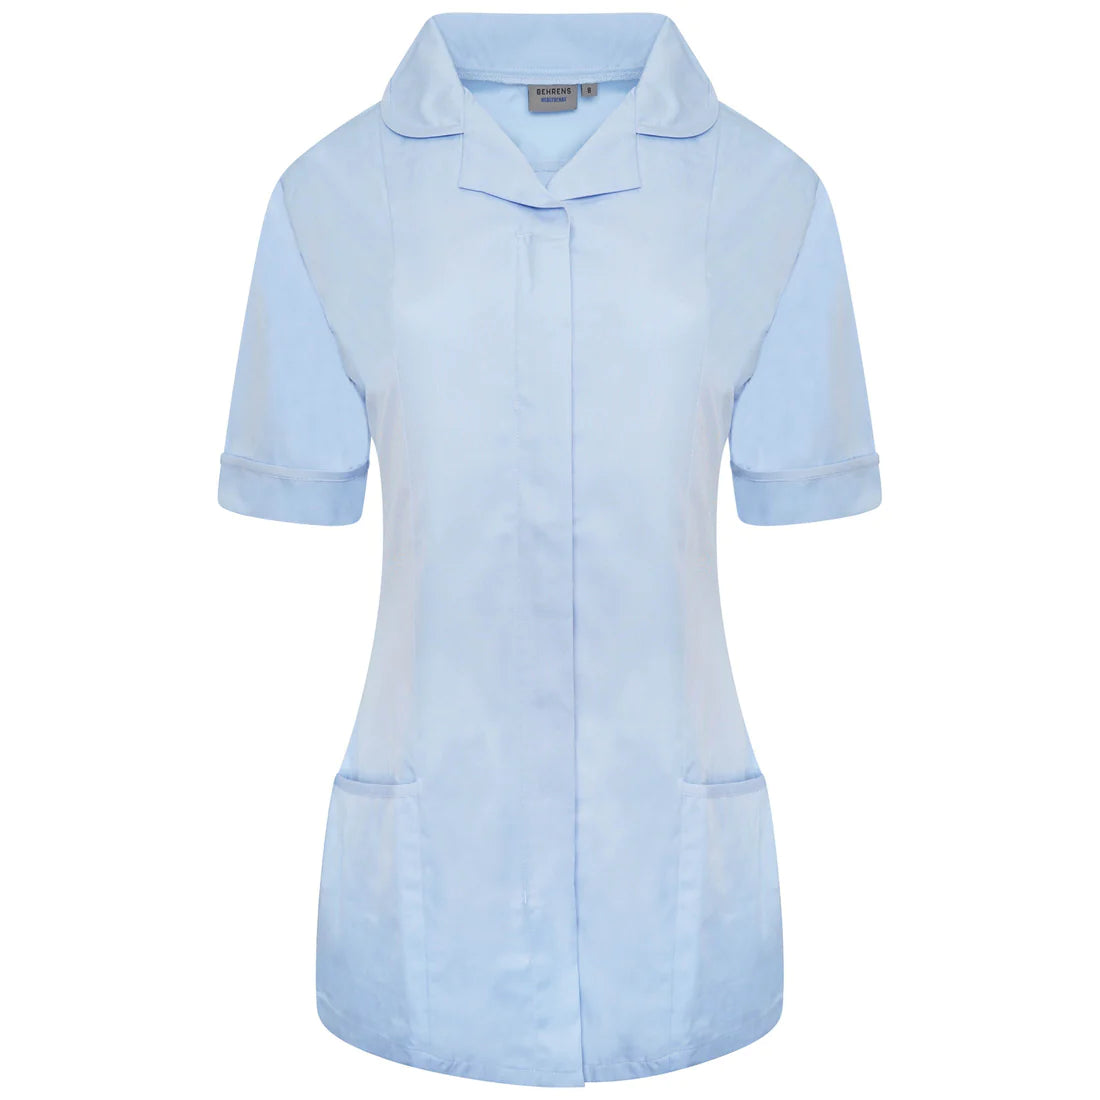 Sky/Sky Contrast Ladies Tunic with Round Collar - NCLTPS